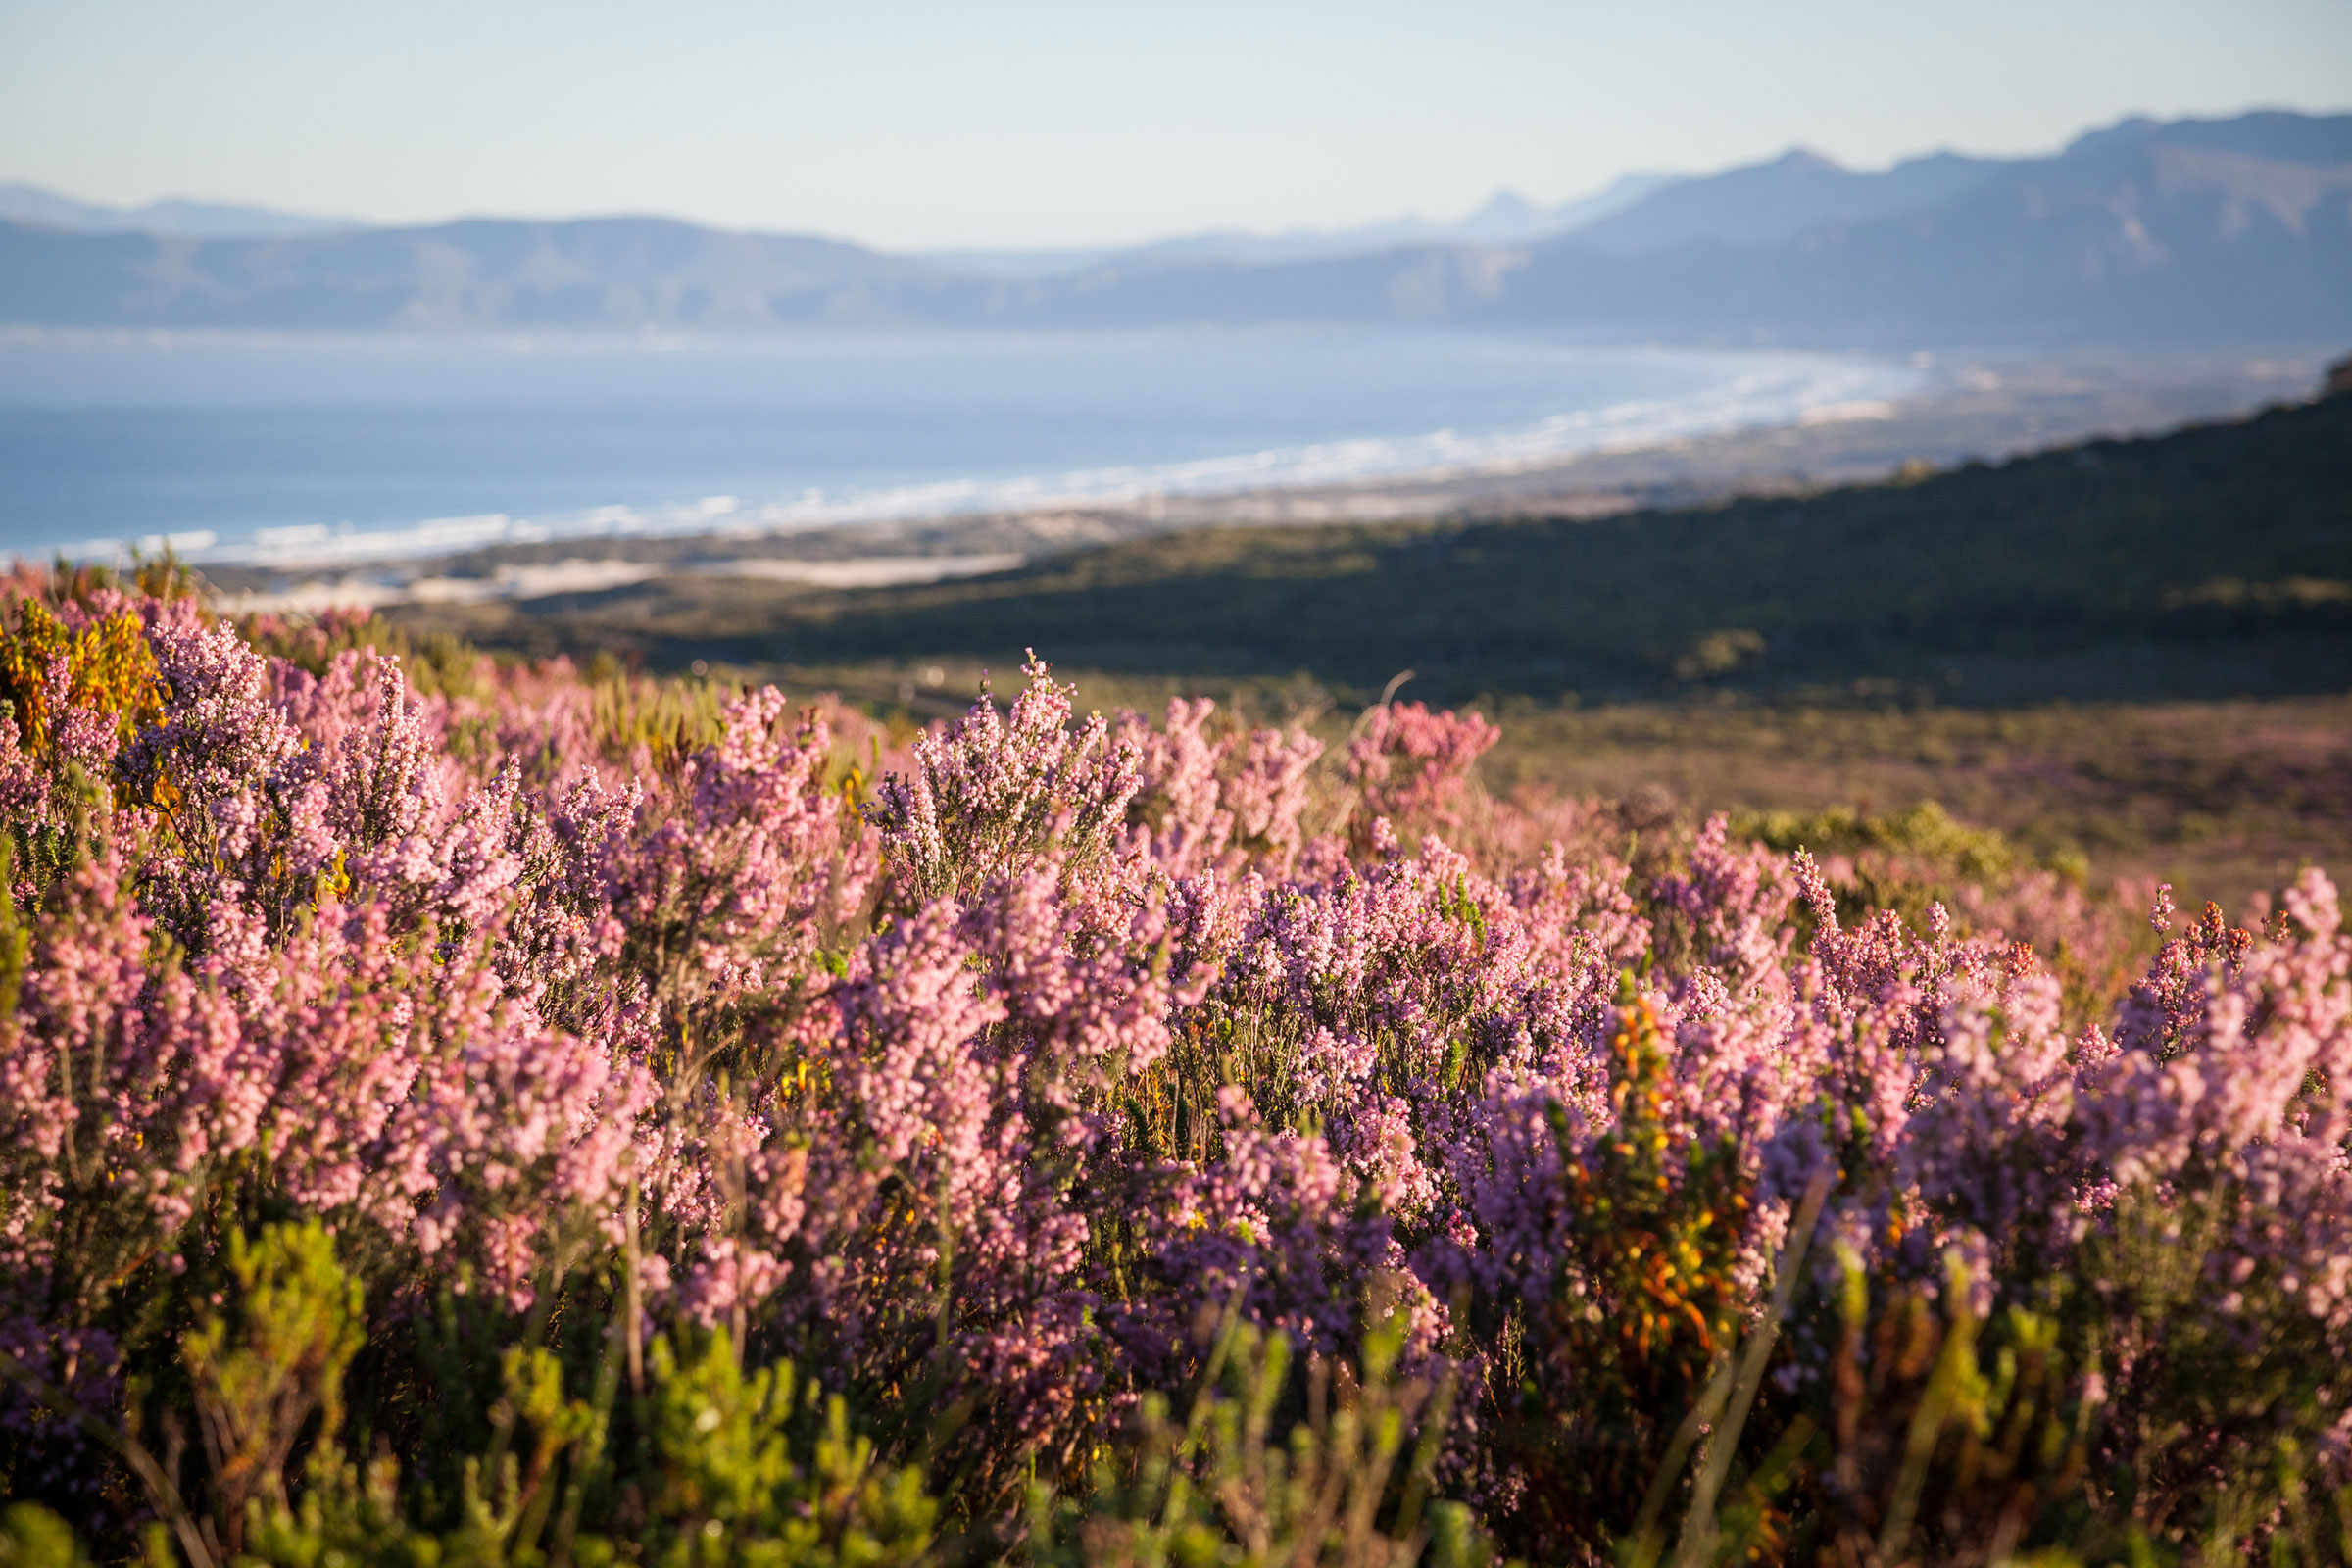 Landscape at Grootbos, South Africa